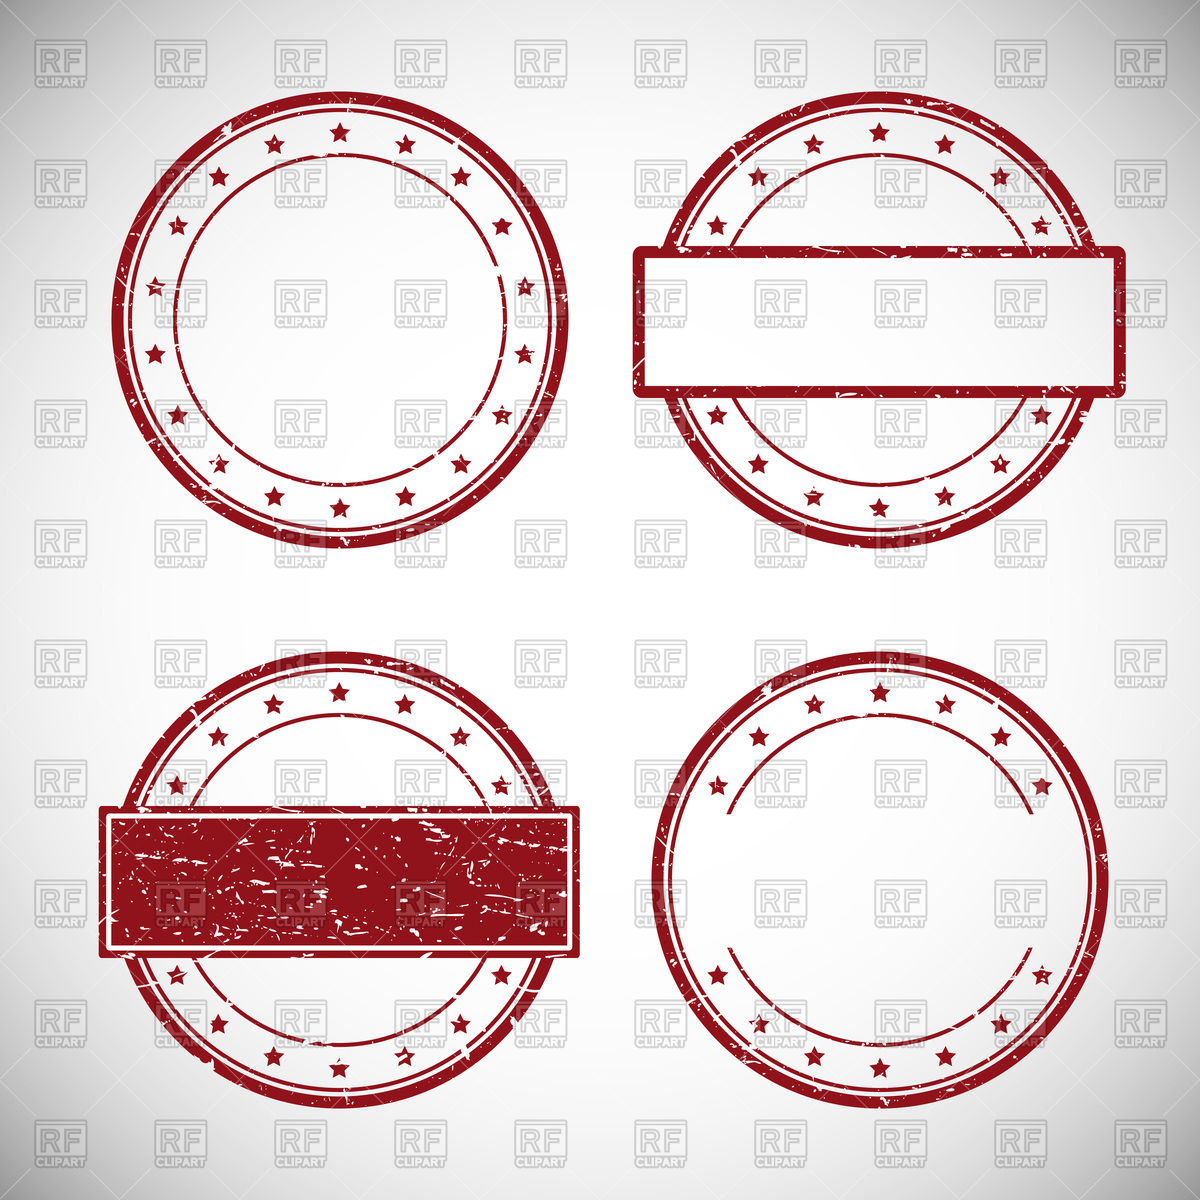     Rubber Stamps 95716 Download Royalty Free Vector Clipart  Eps